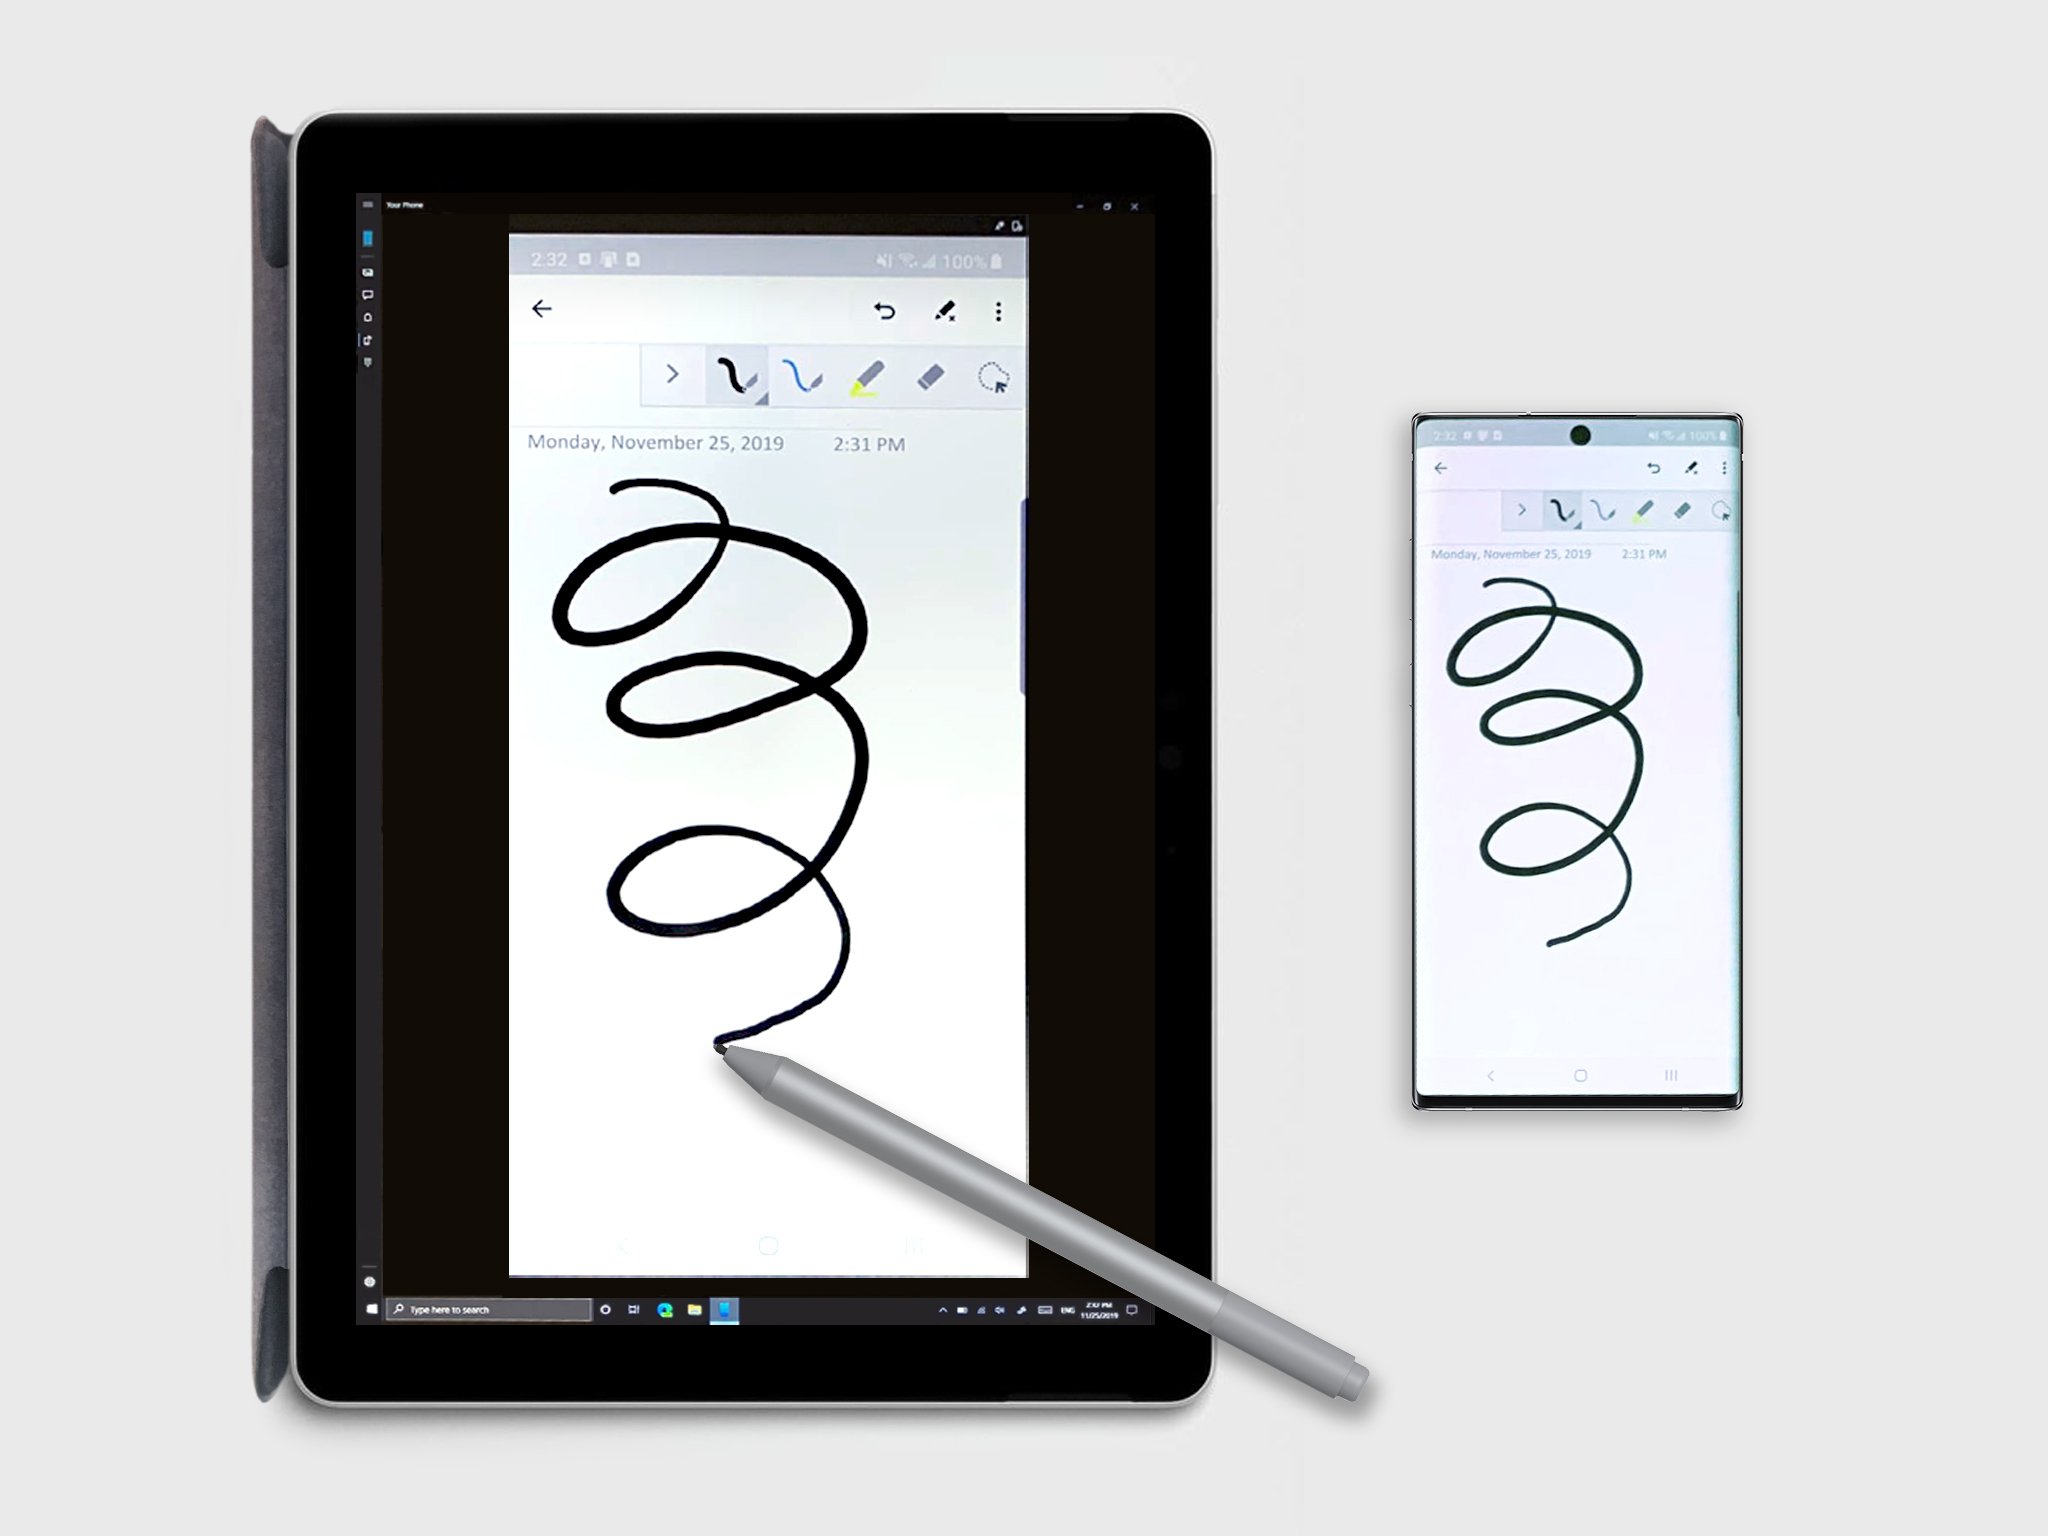 Screen showing a pen’s input on the PC screen and same showing up on the phone.